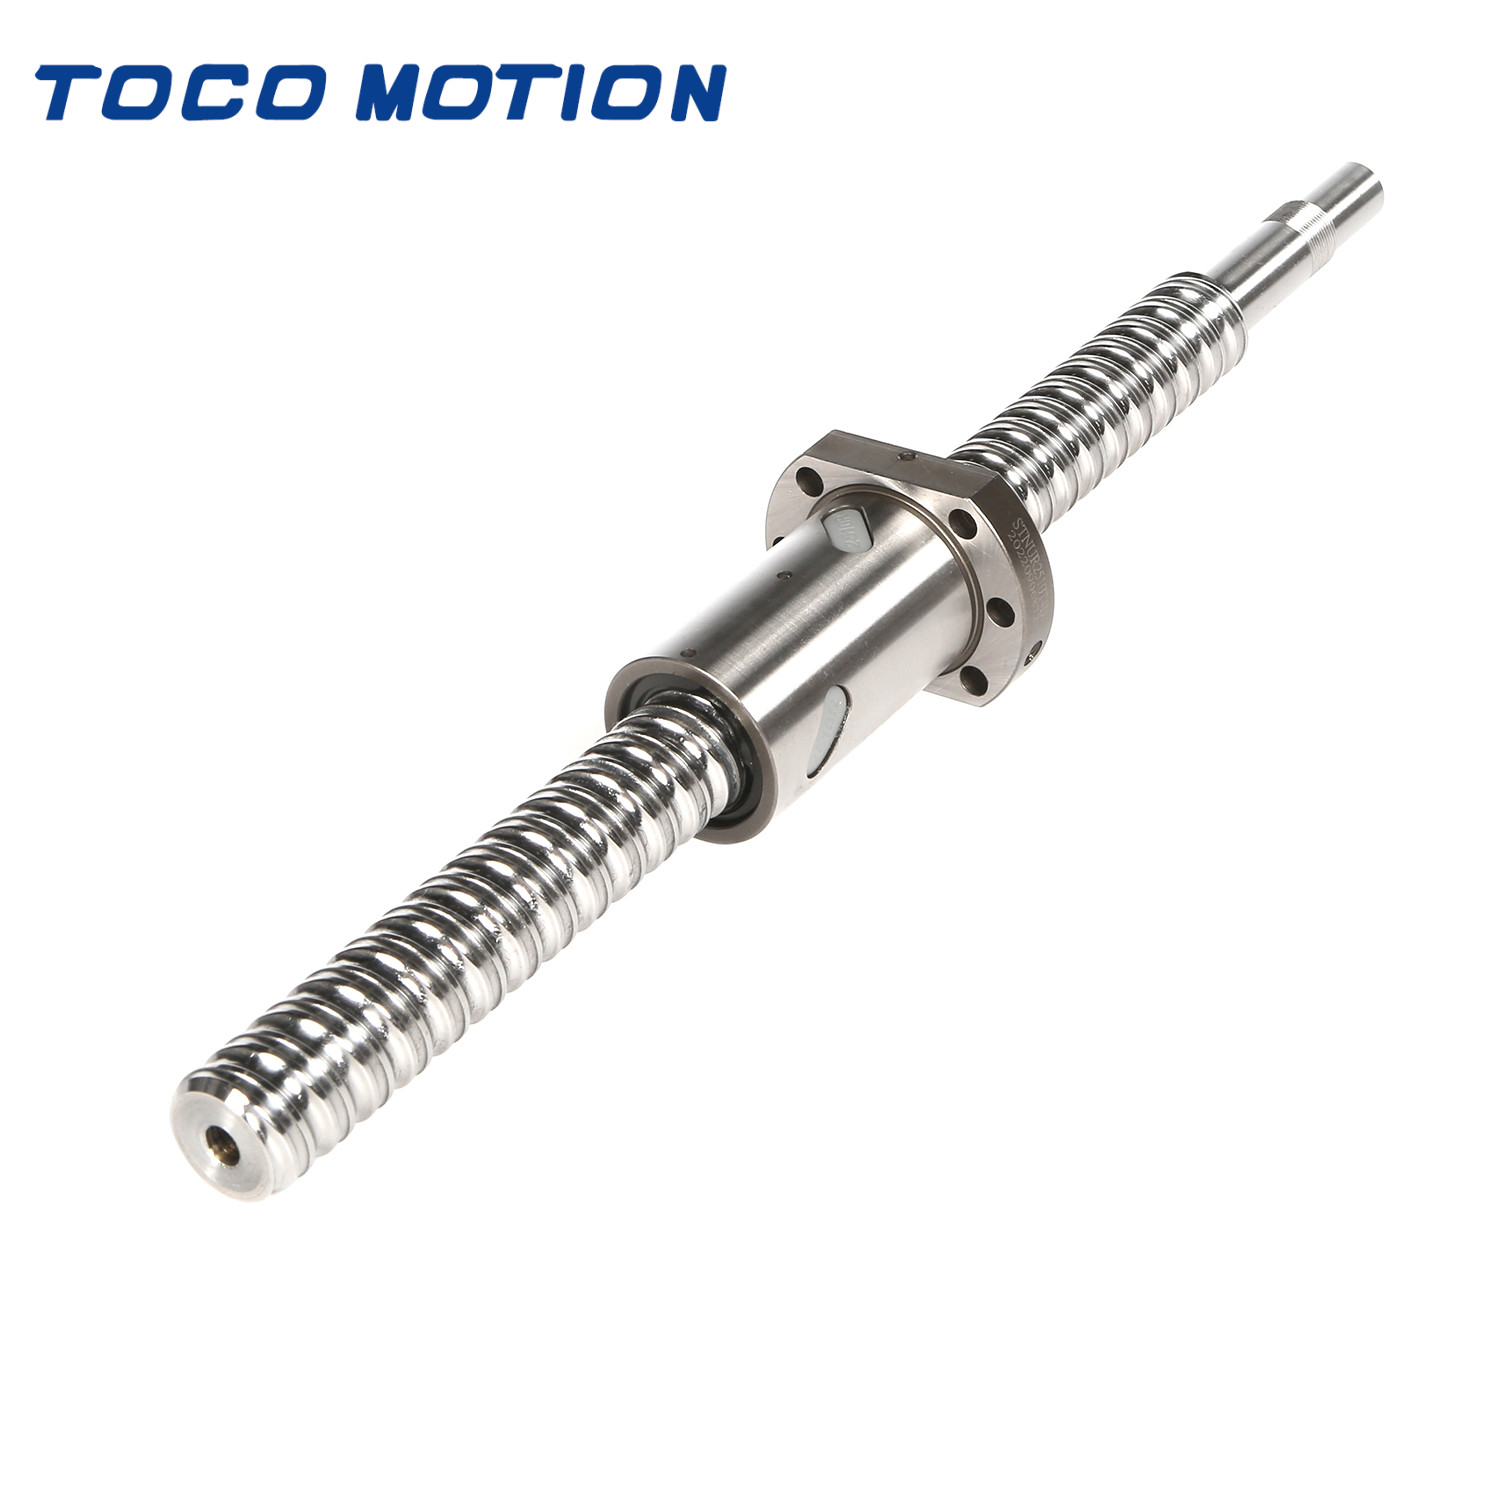 Competitive Ball Screws